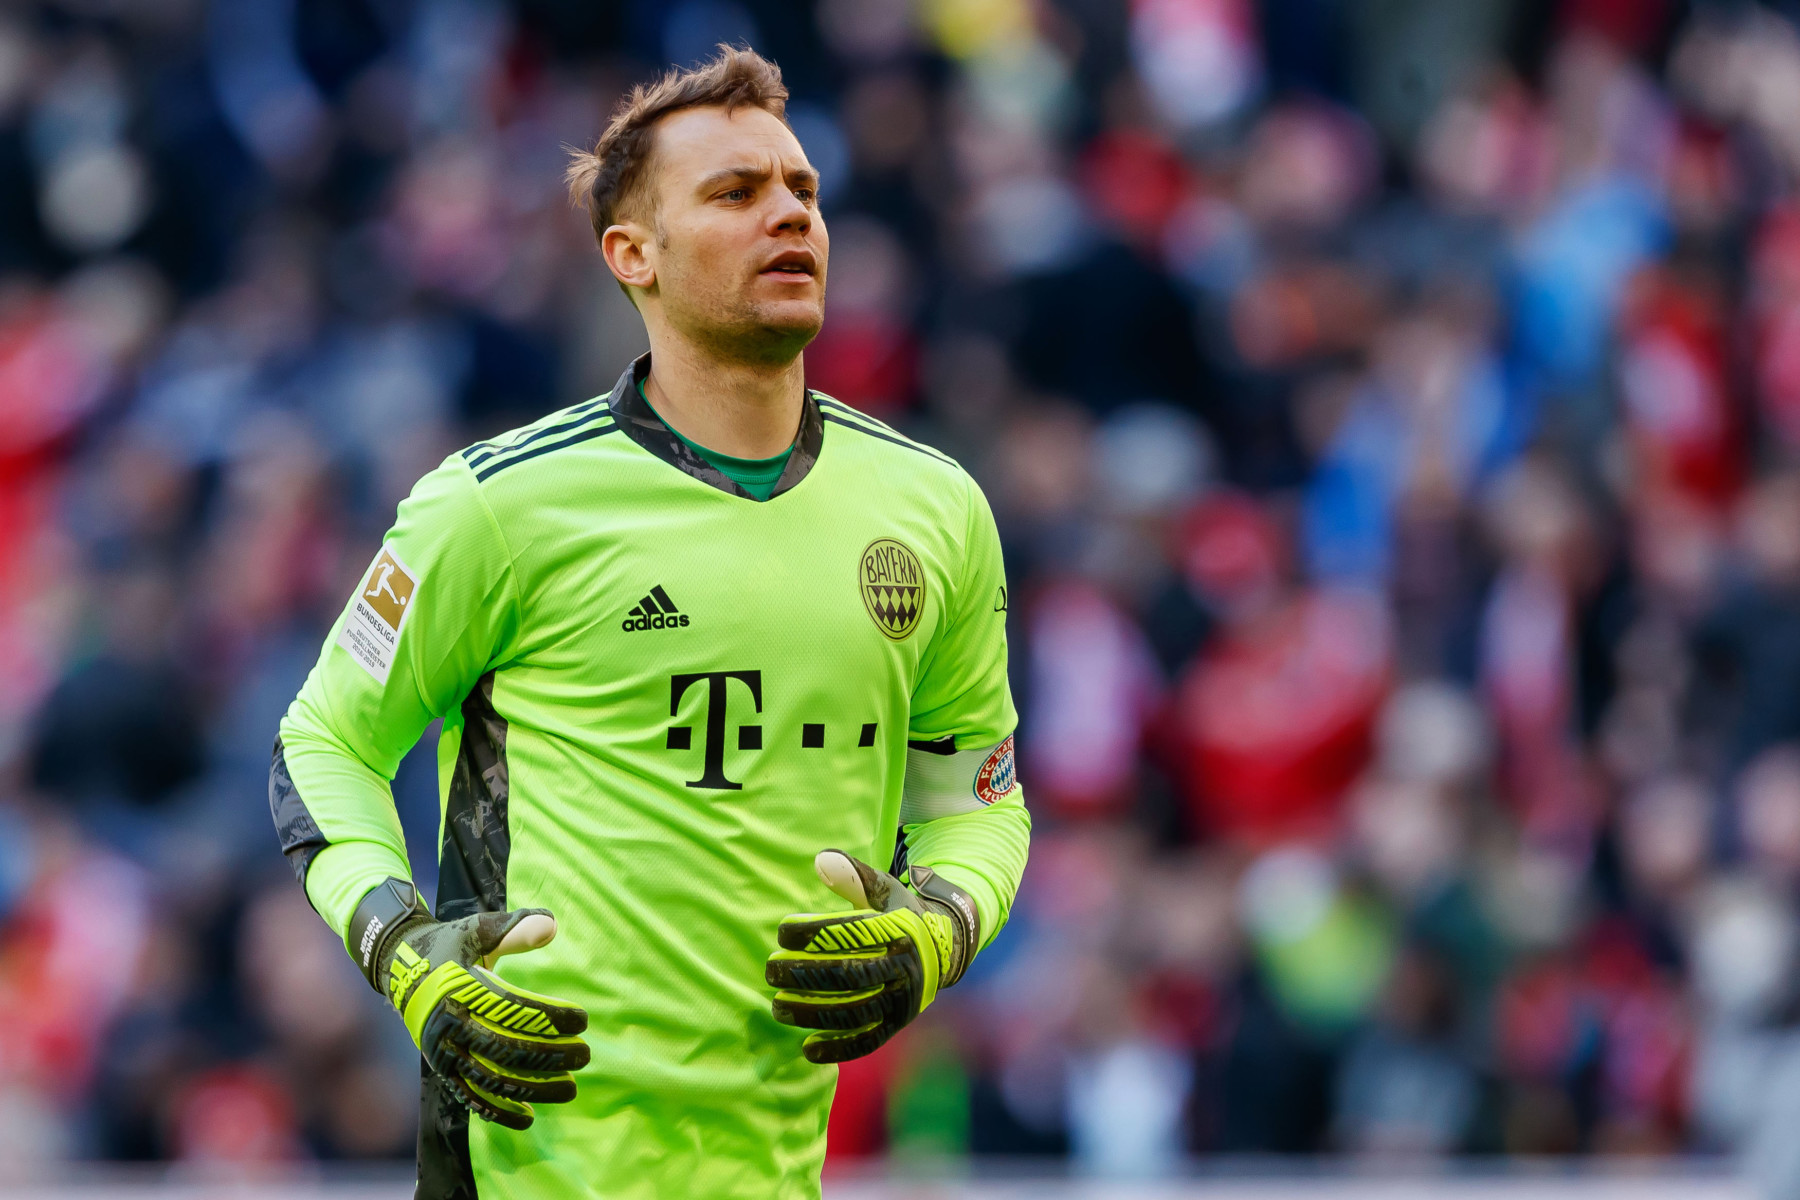 , Chelsea transfer boost as Manuel Neuer ‘refuses to sign new Bayern contract because 34-year-old wants five-year deal’